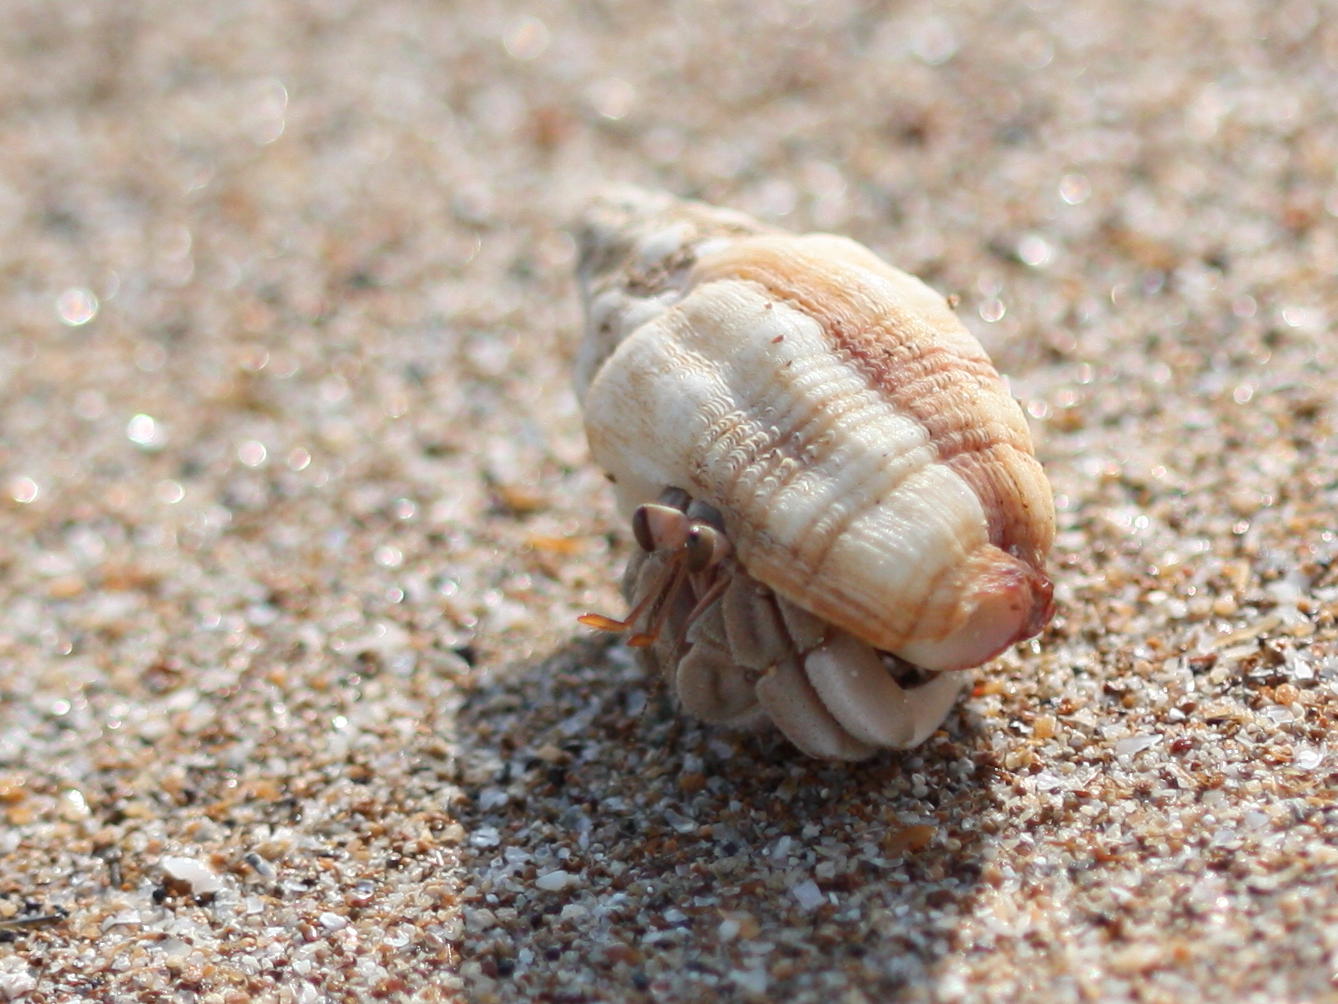 small sea creature looking out of its shell on the sand